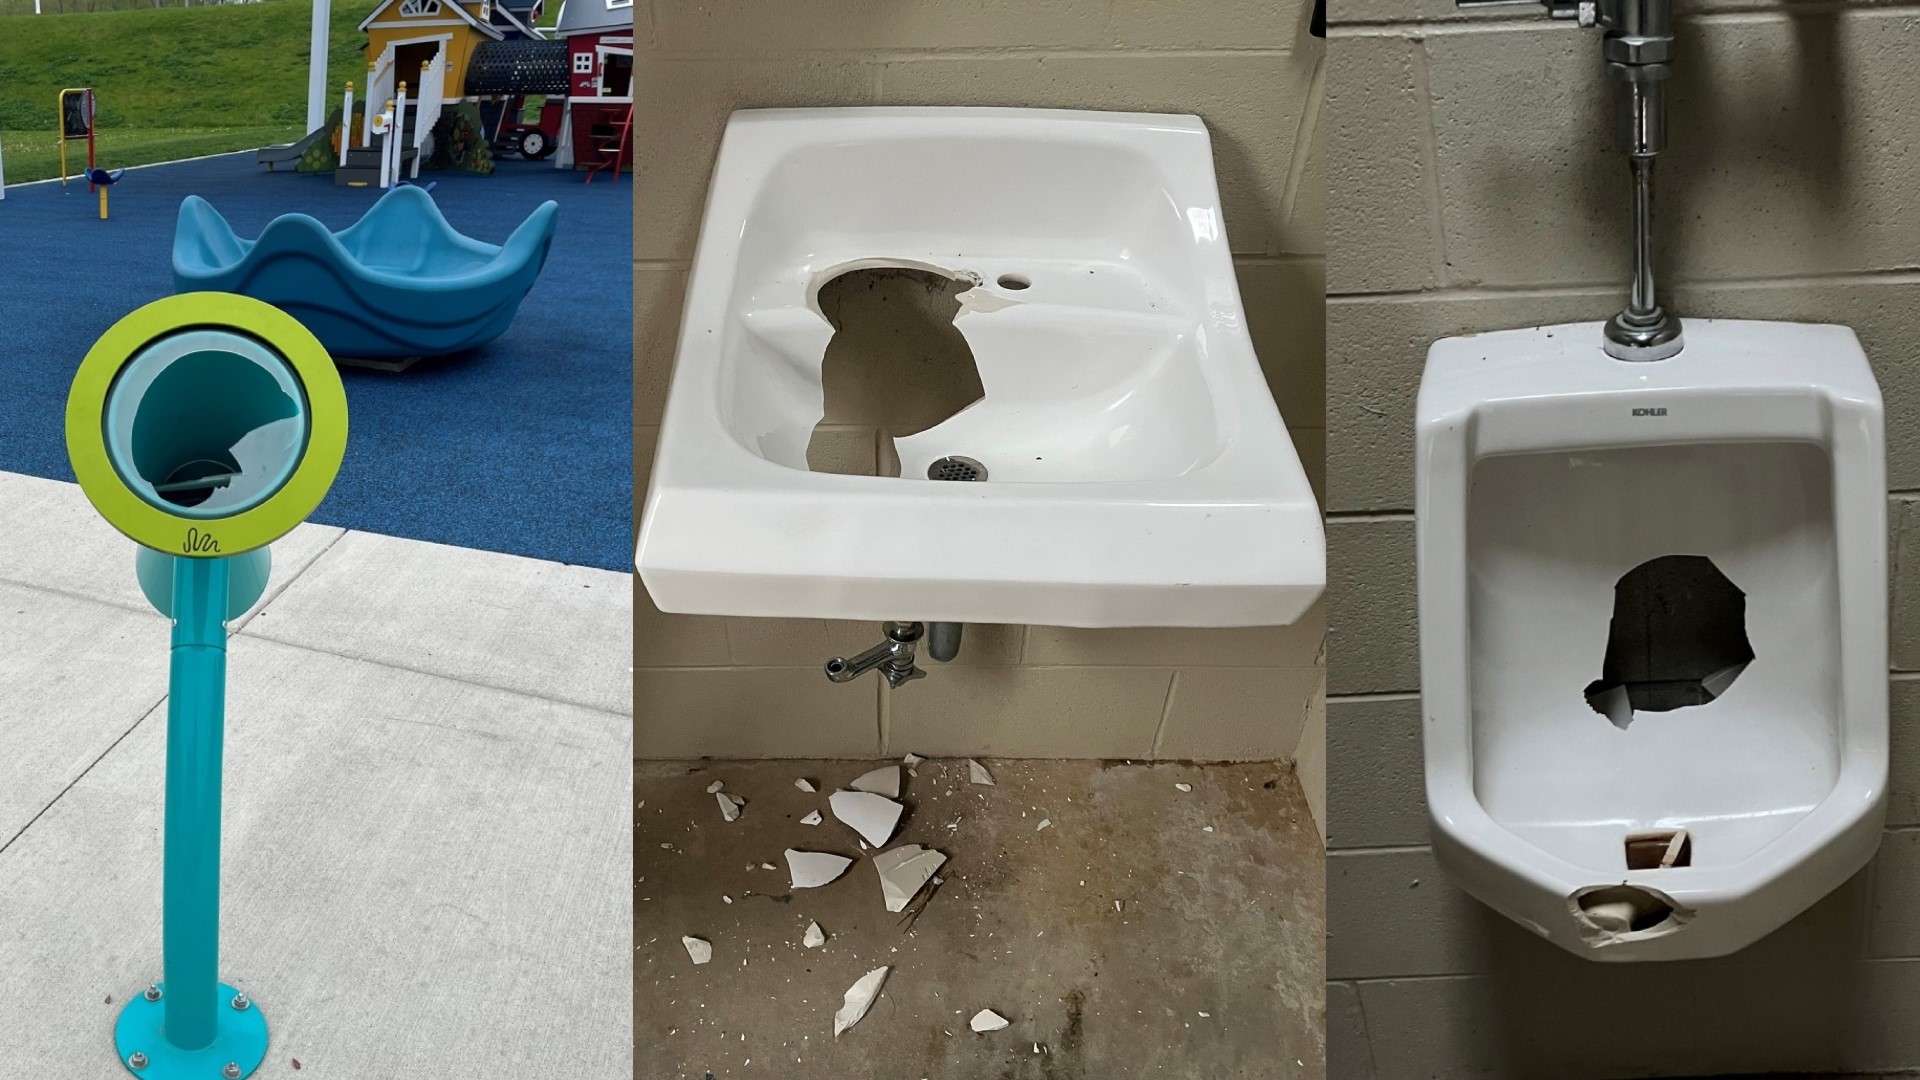 Shattered sinks and toilets, busted playground equipment and graffiti involving racial slurs are just a few of the things reported at the parks over the past weeks.